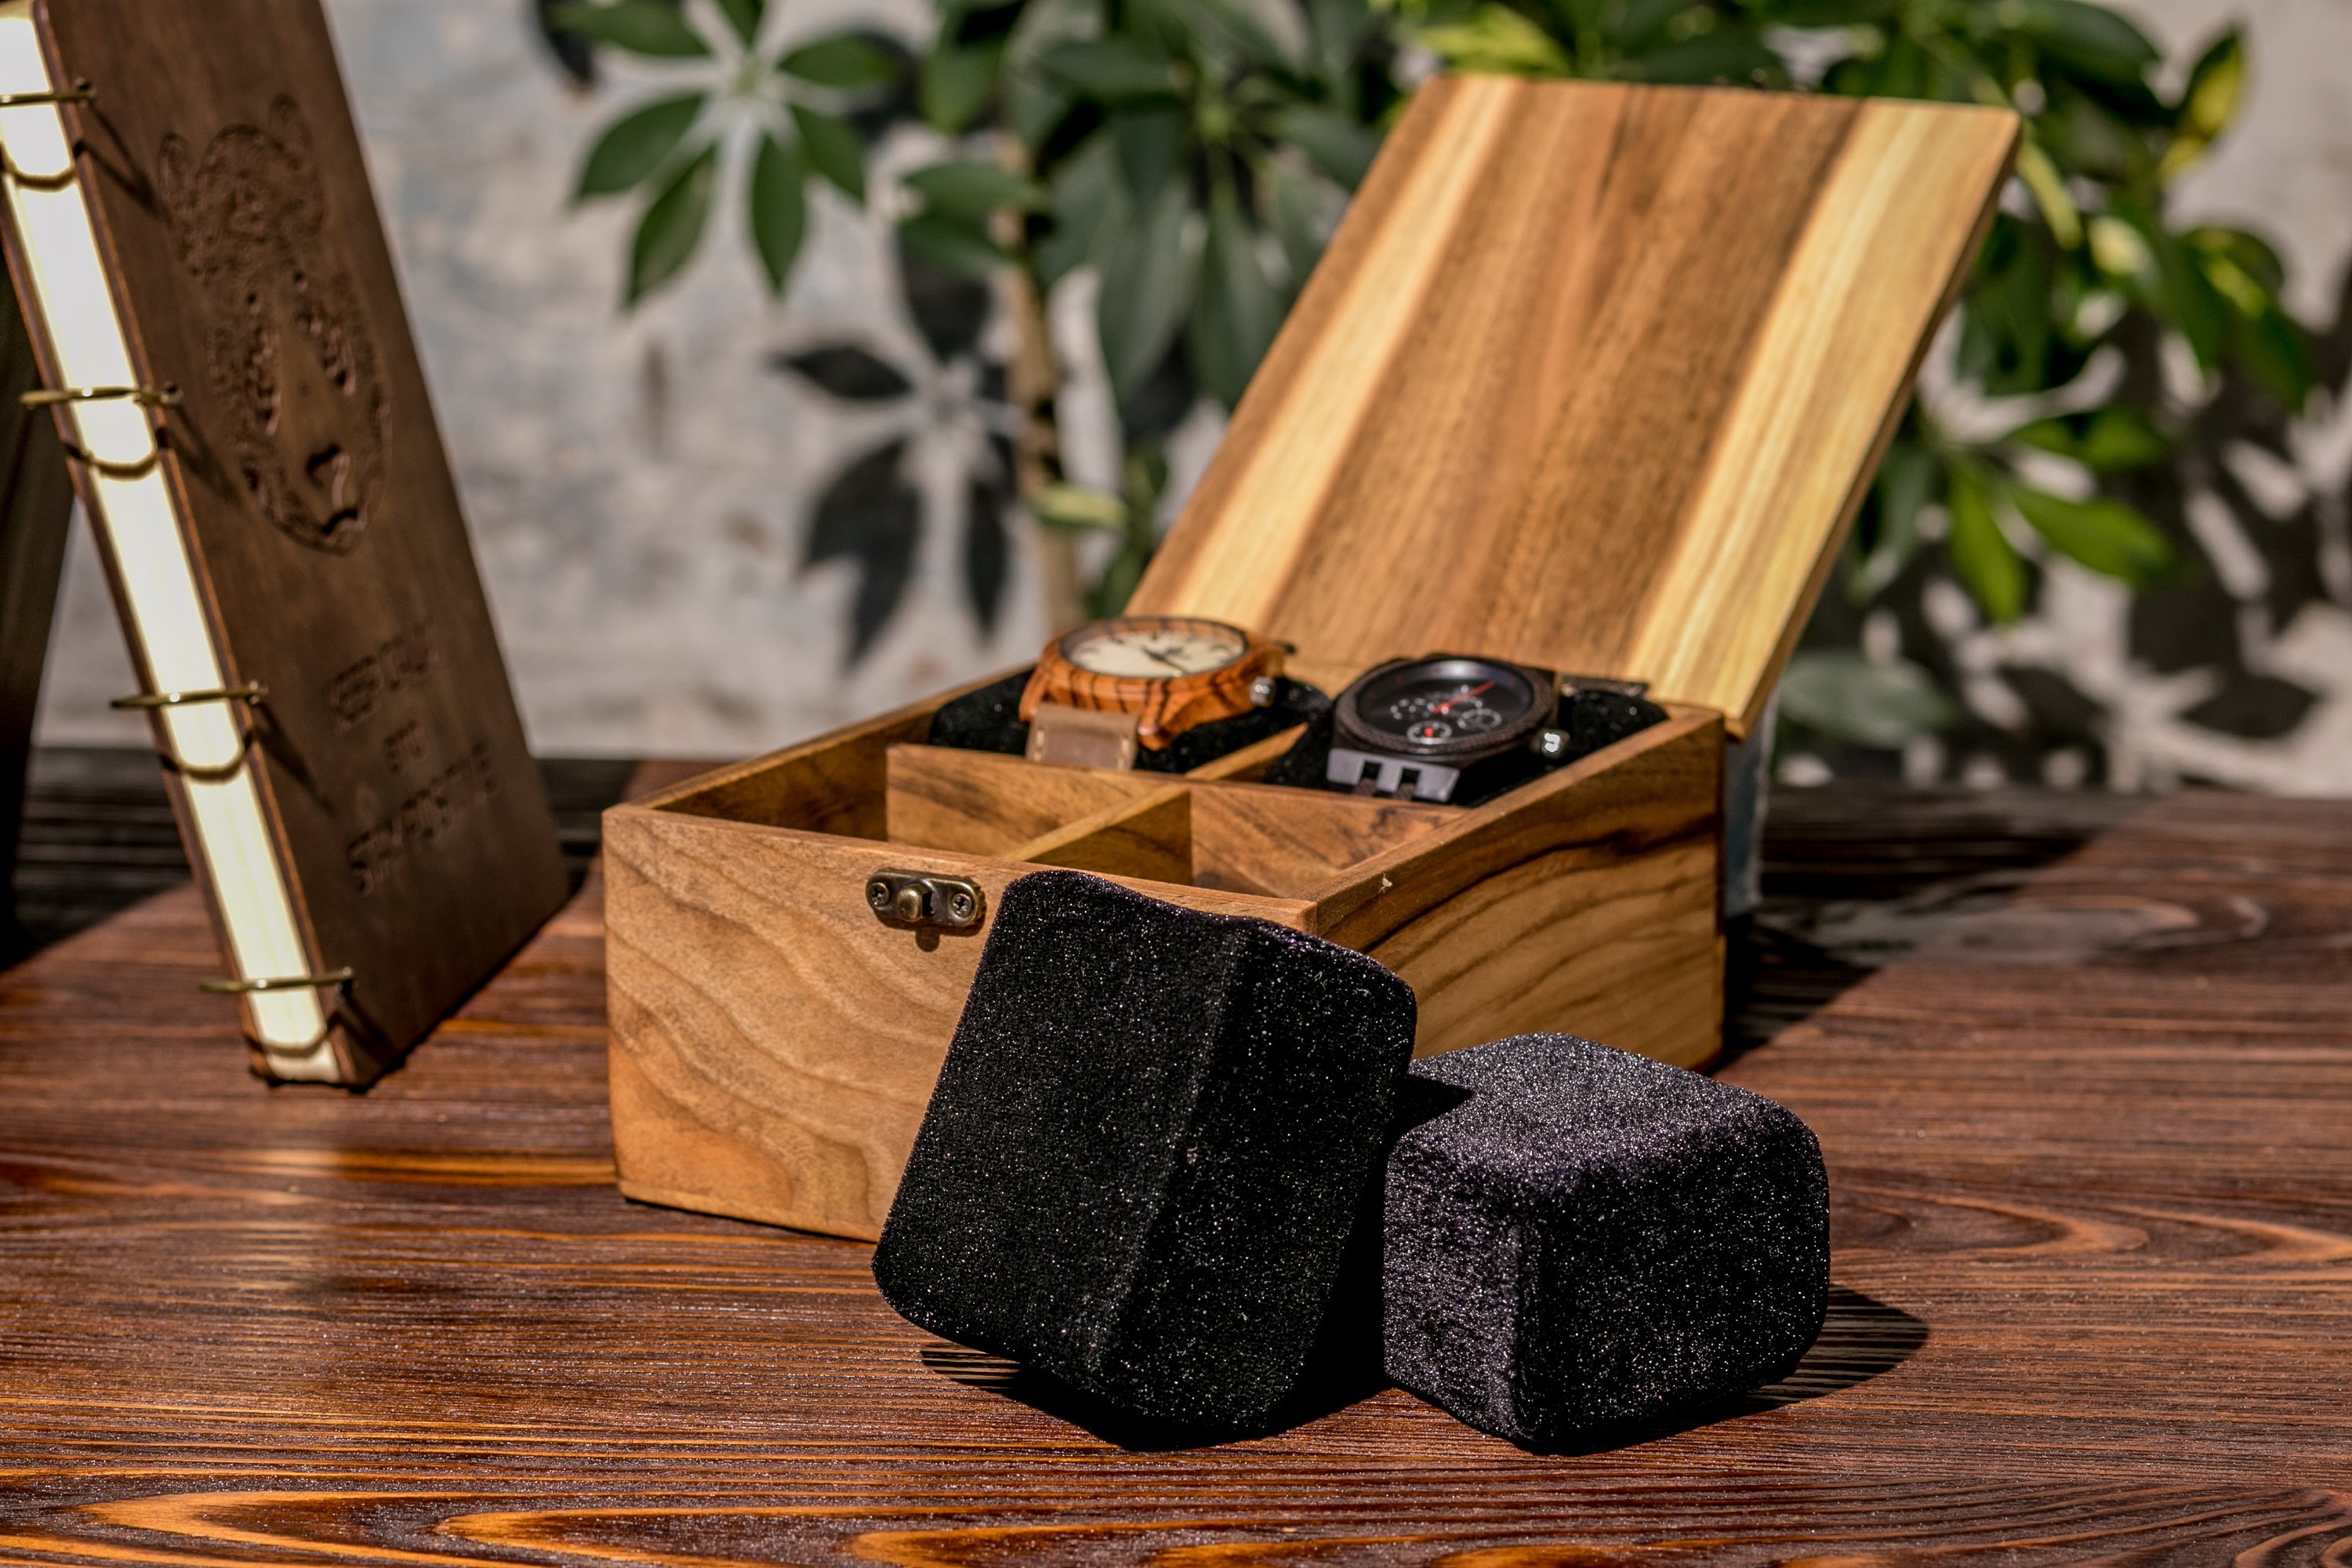 Watch Box by SkinWood - 4 Watches